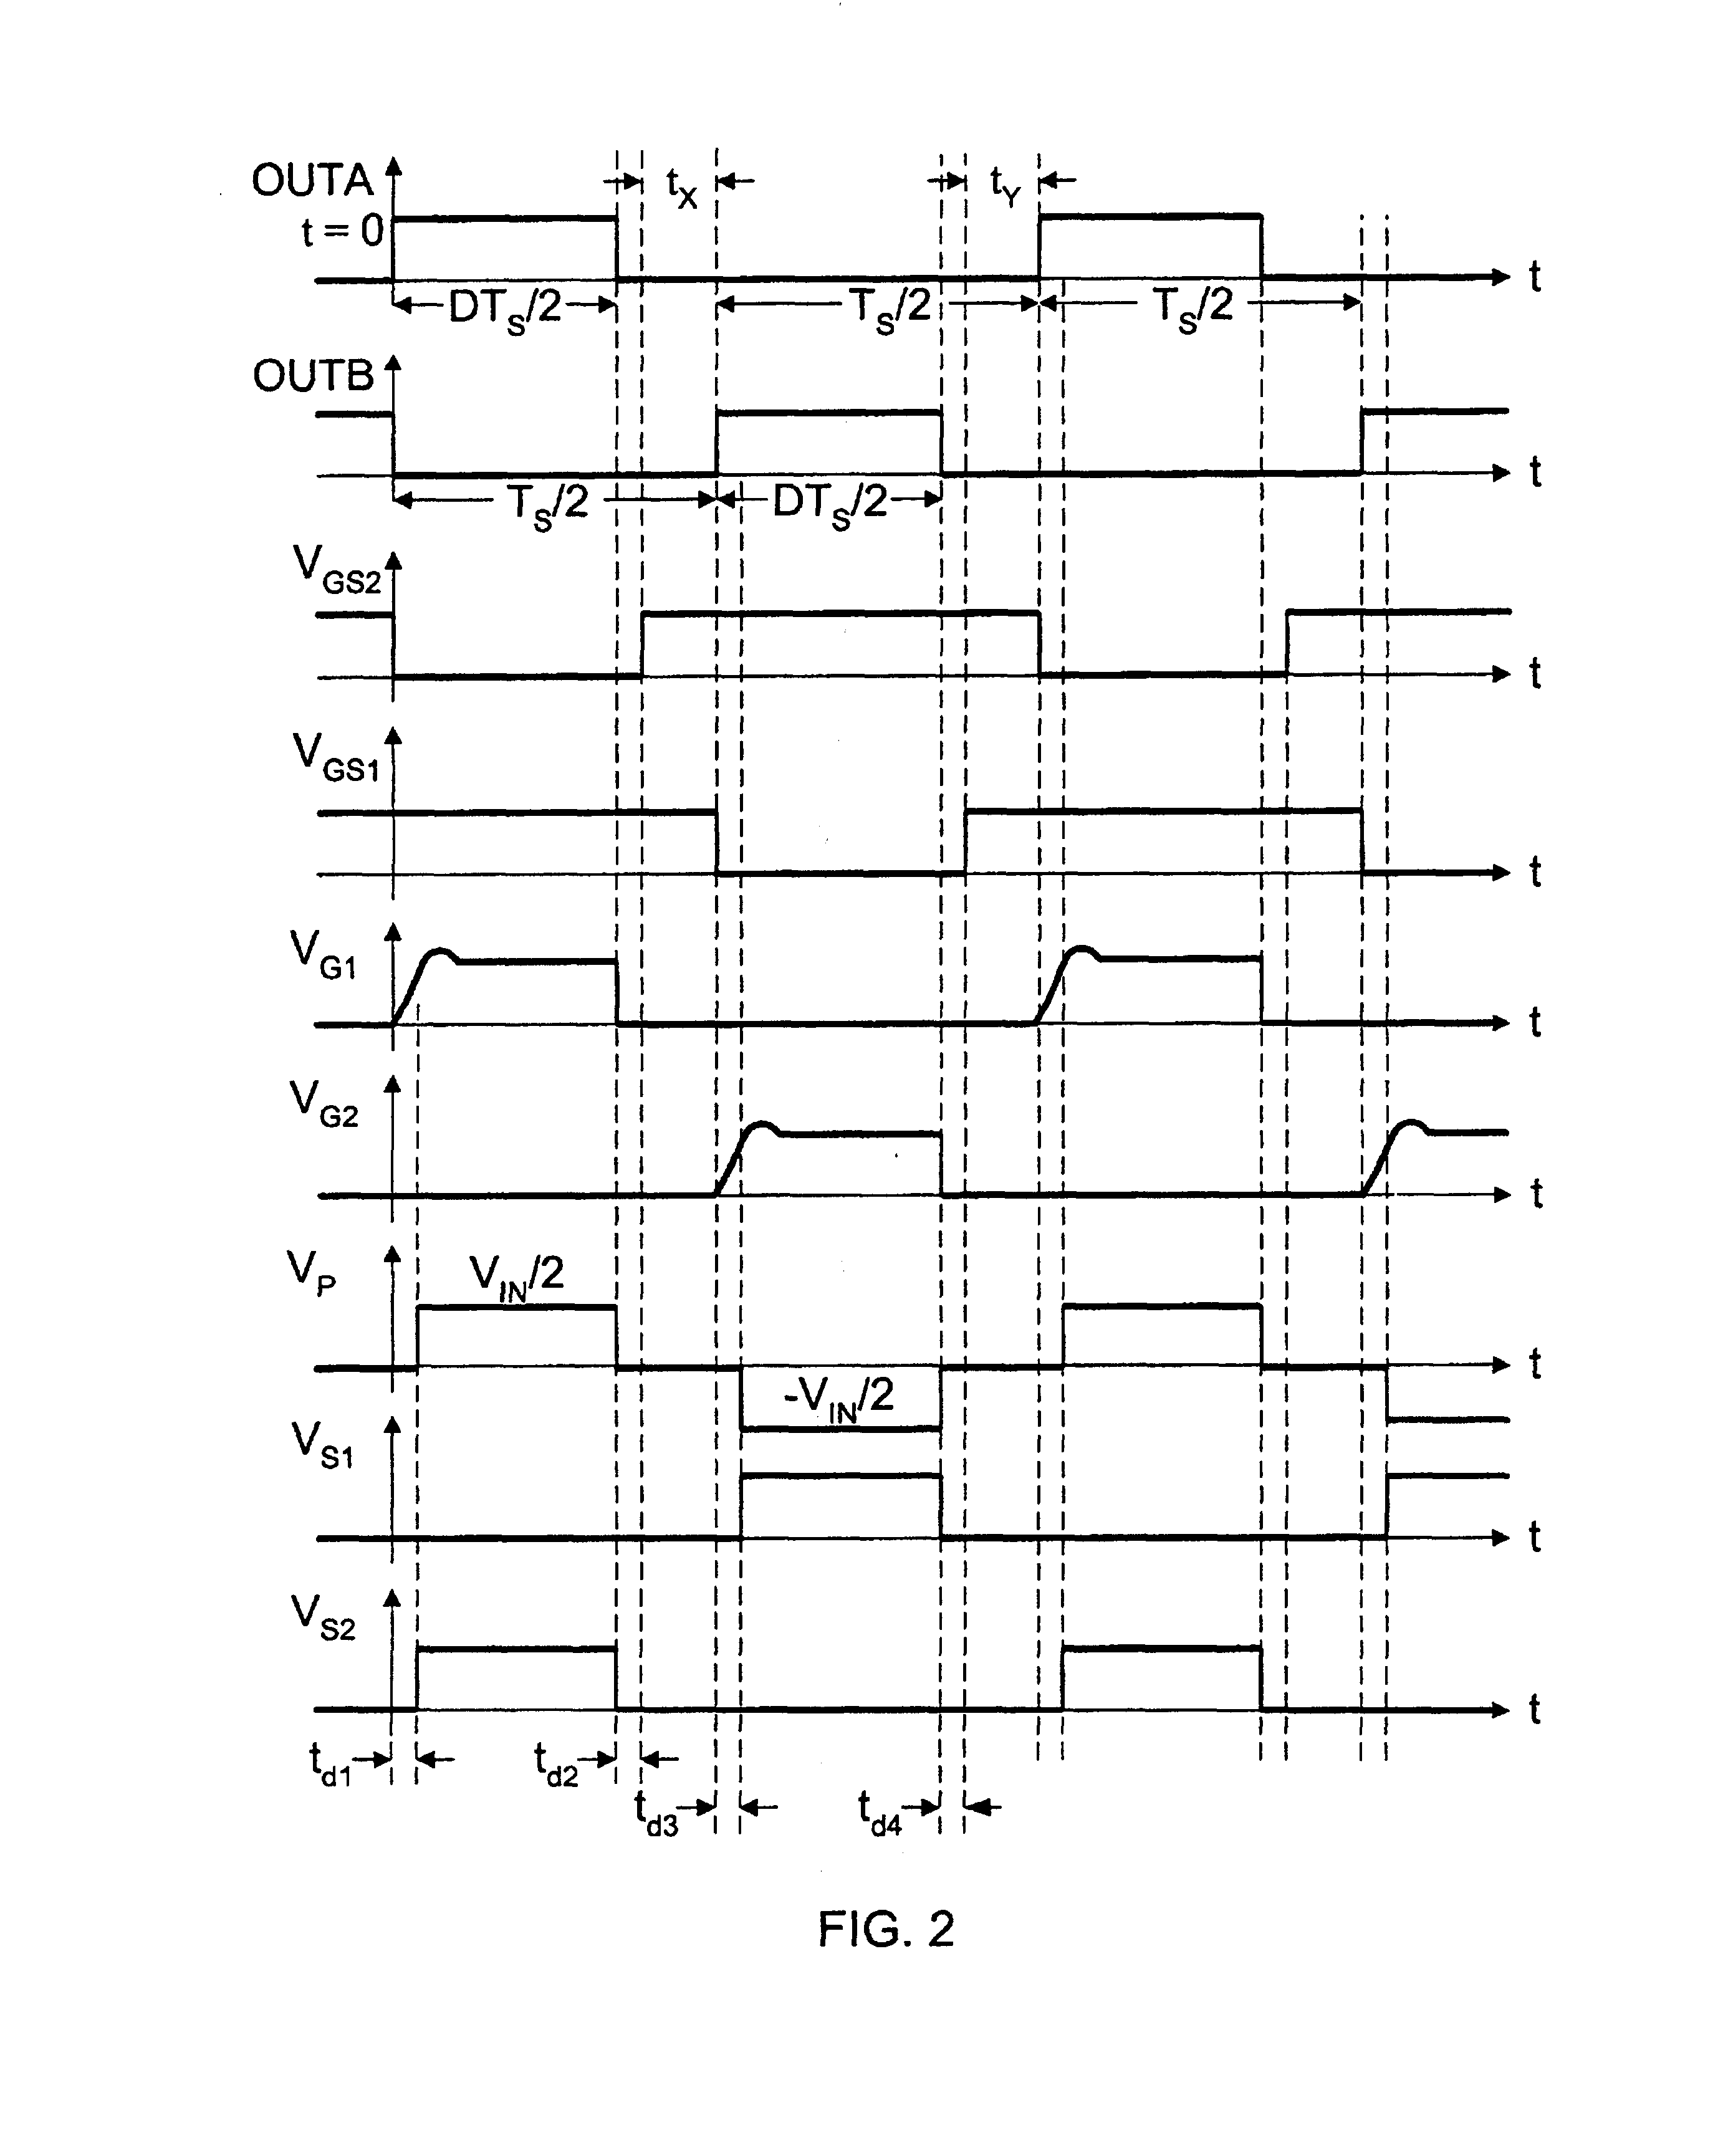 Isolated drive circuitry used in switch-mode power converters